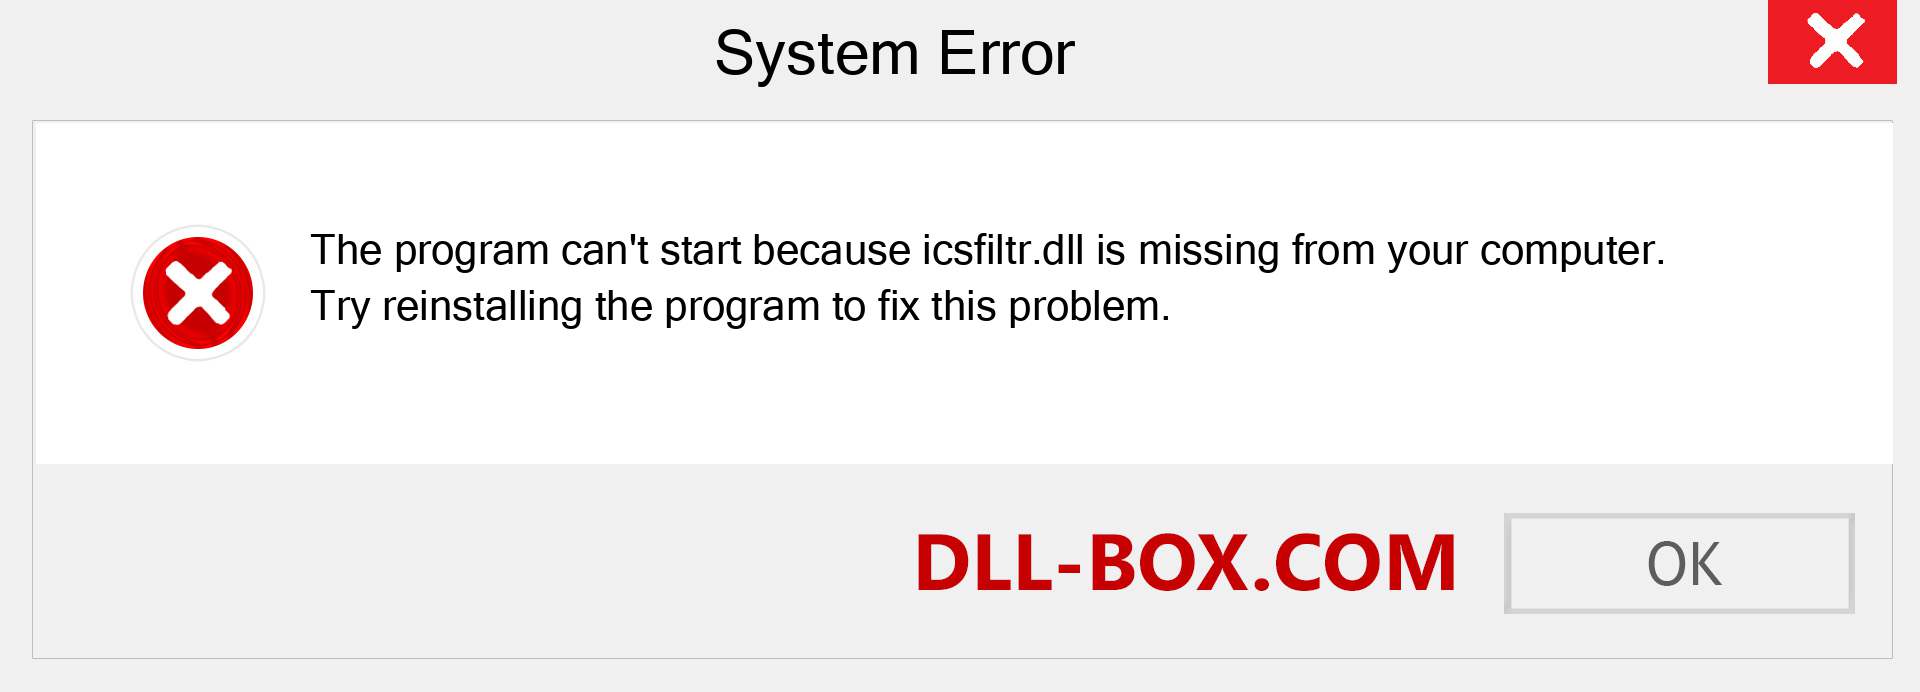  icsfiltr.dll file is missing?. Download for Windows 7, 8, 10 - Fix  icsfiltr dll Missing Error on Windows, photos, images